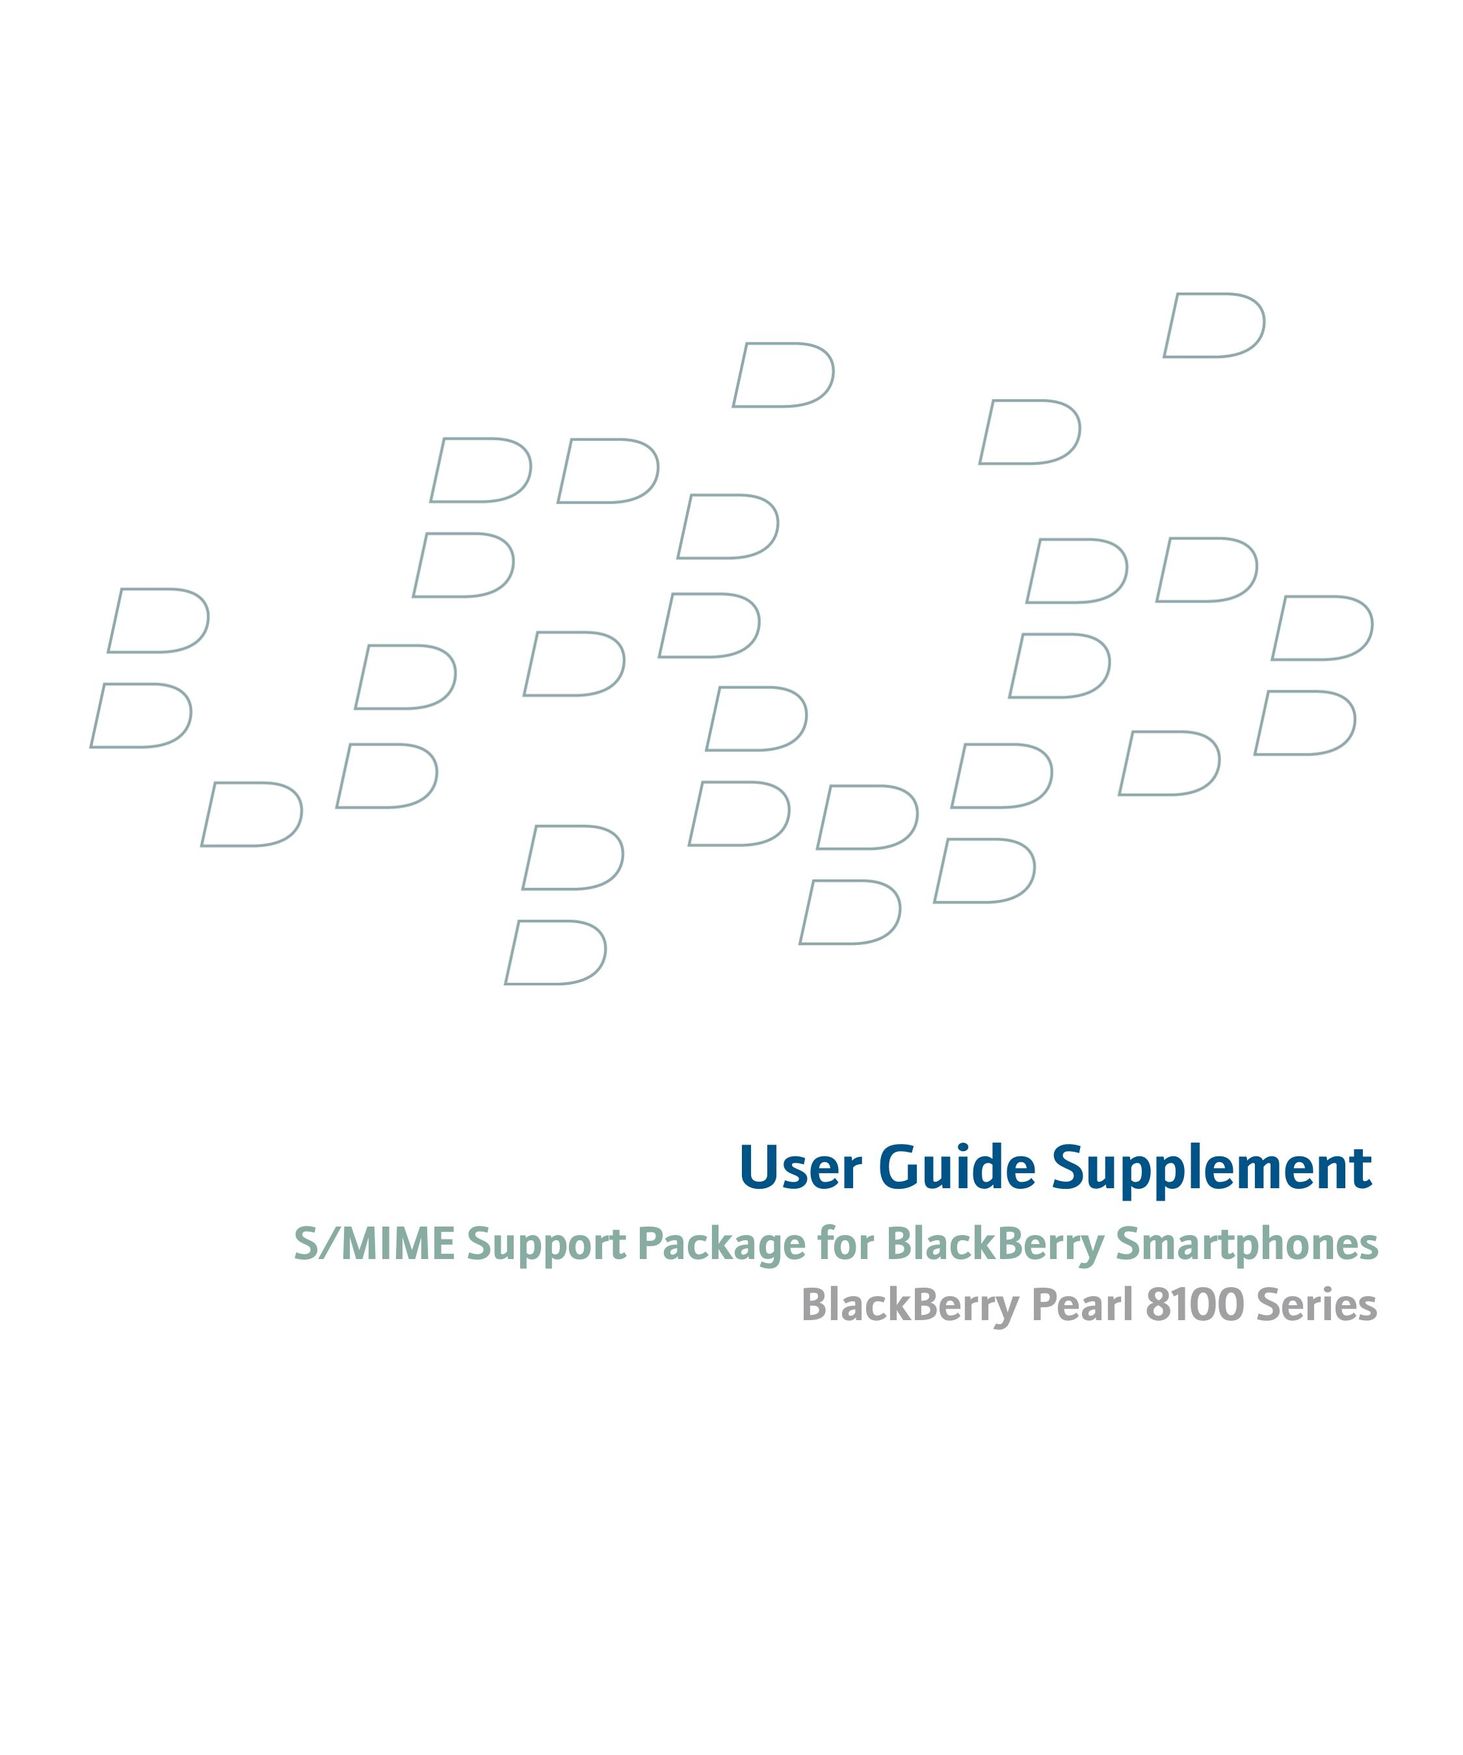 Blackberry 8100 Series Cell Phone User Manual